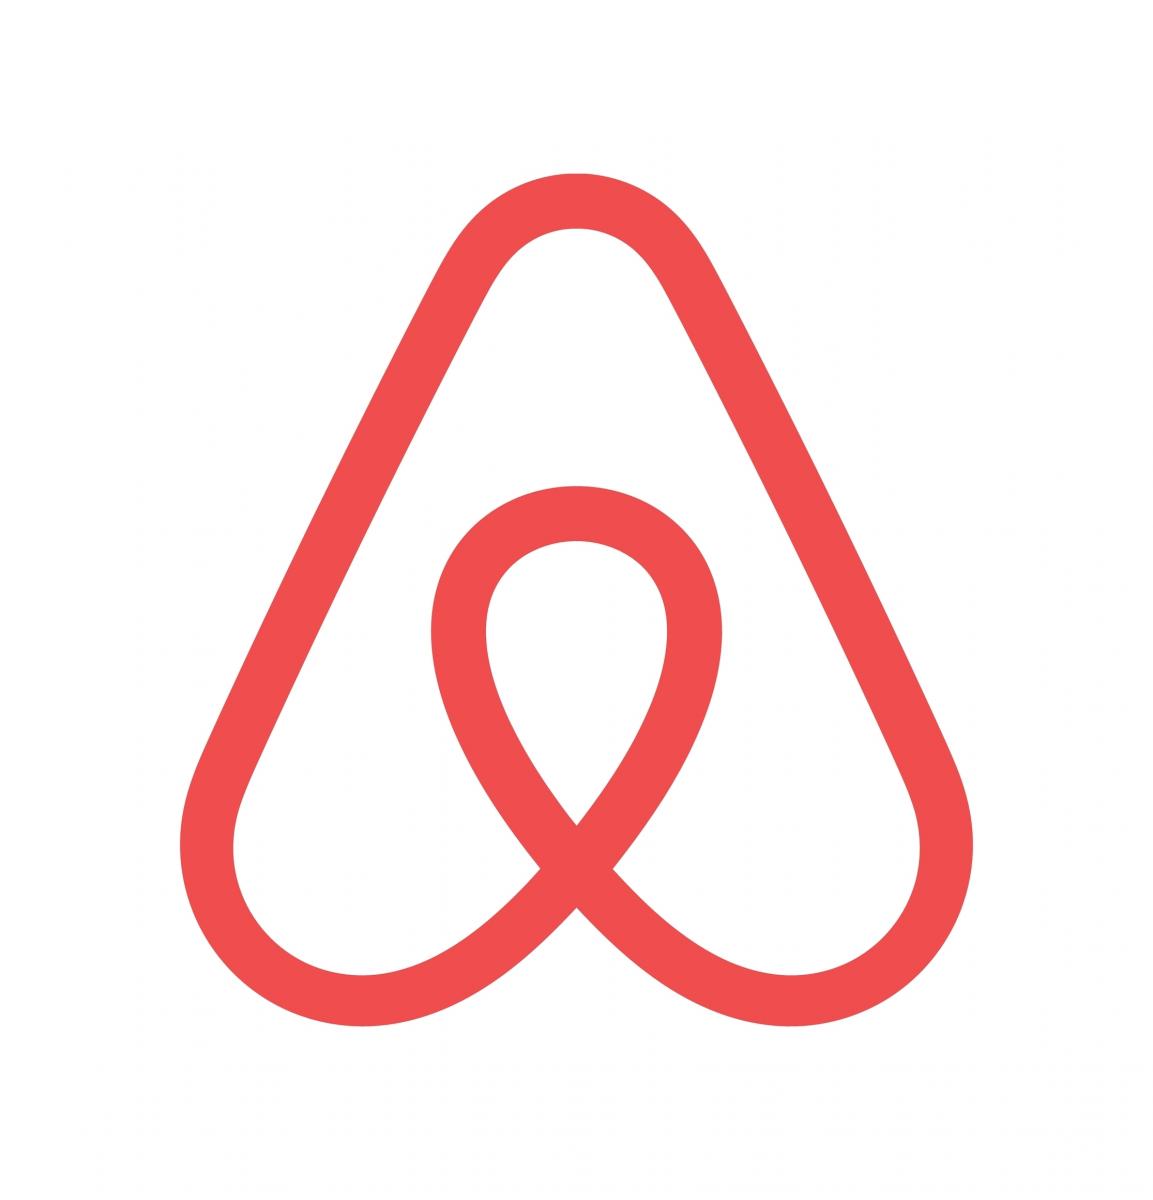 One city loses 1,500 rental homes to Airbnb - claim